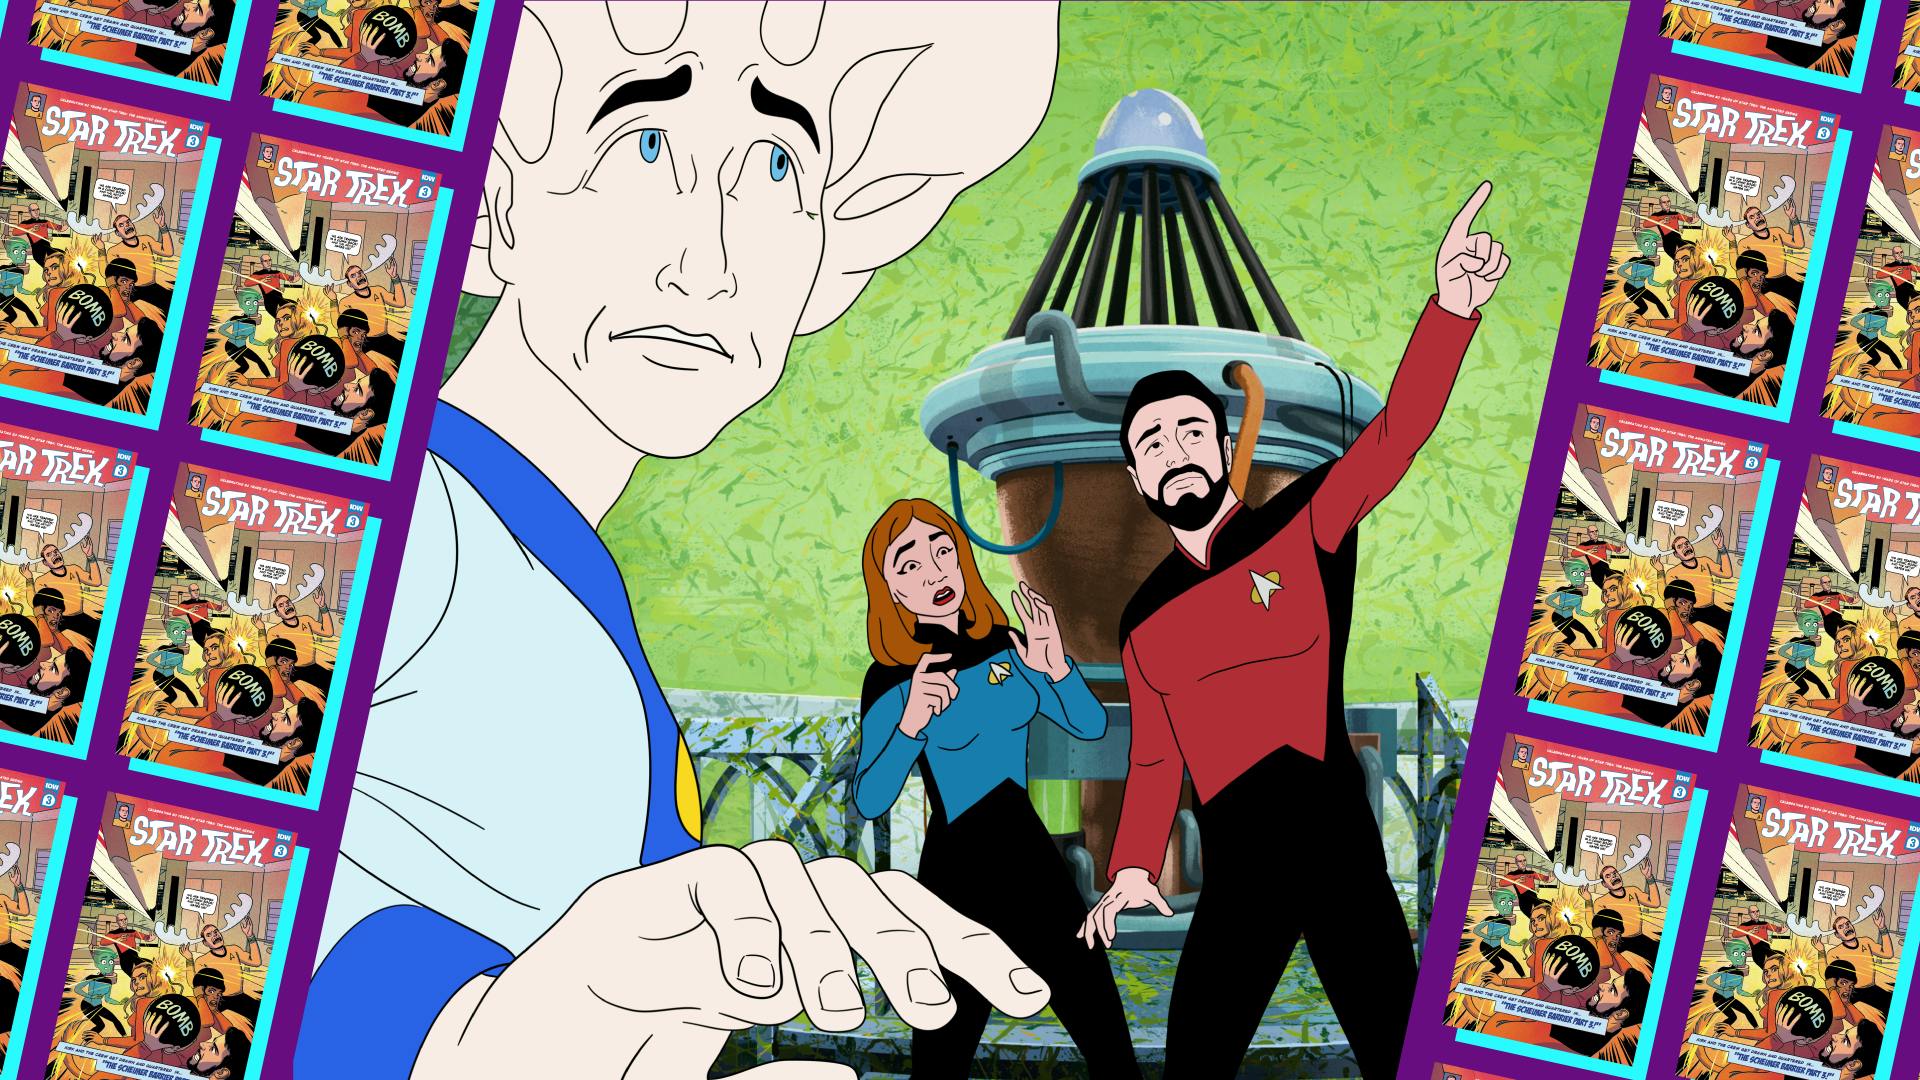 Banner image featuring Dr. Beverly Crusher and Riker pointing up at something above them while standing in front of a warp drive, as a species member looks over in concern along with the comic cover for STAR TREK: THE ANIMATED CELEBRATION PRESENTS THE SCHEIMER BARRIER - Chapter 3